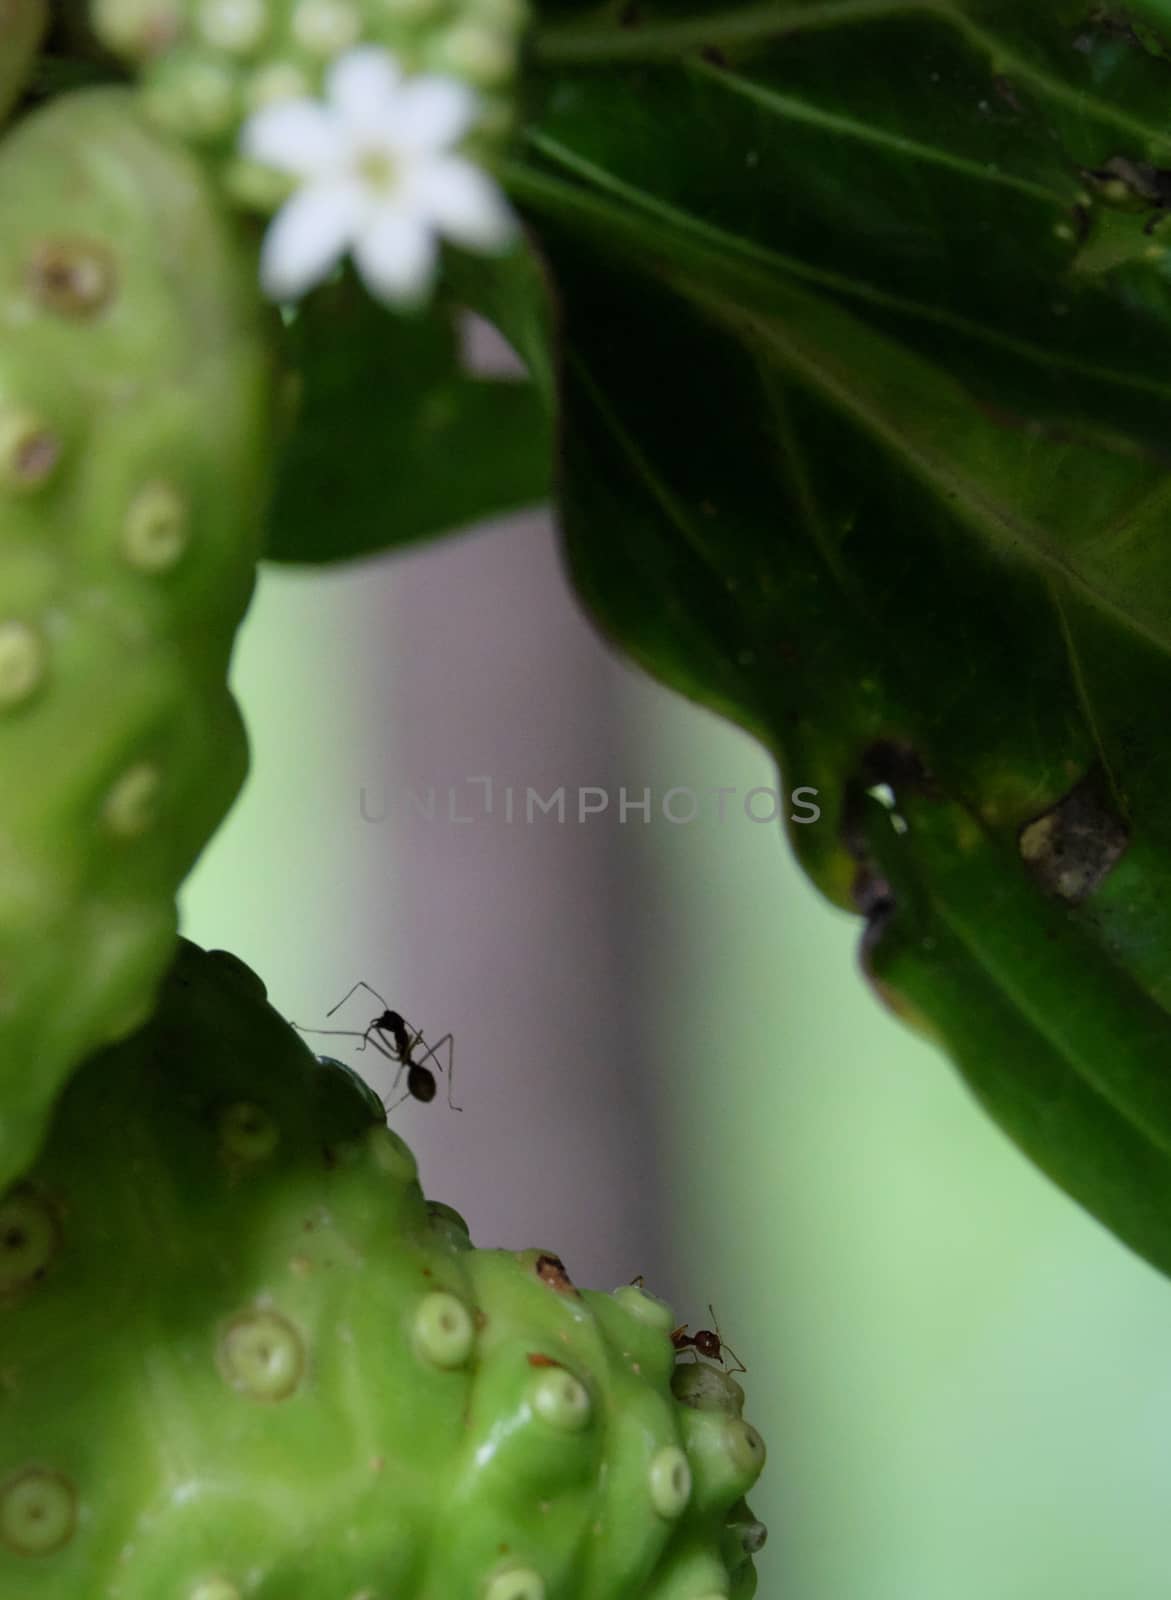 ant and tropical plant Noni or Indian Mulberry (Morinda. Citrifo by rainfallsup